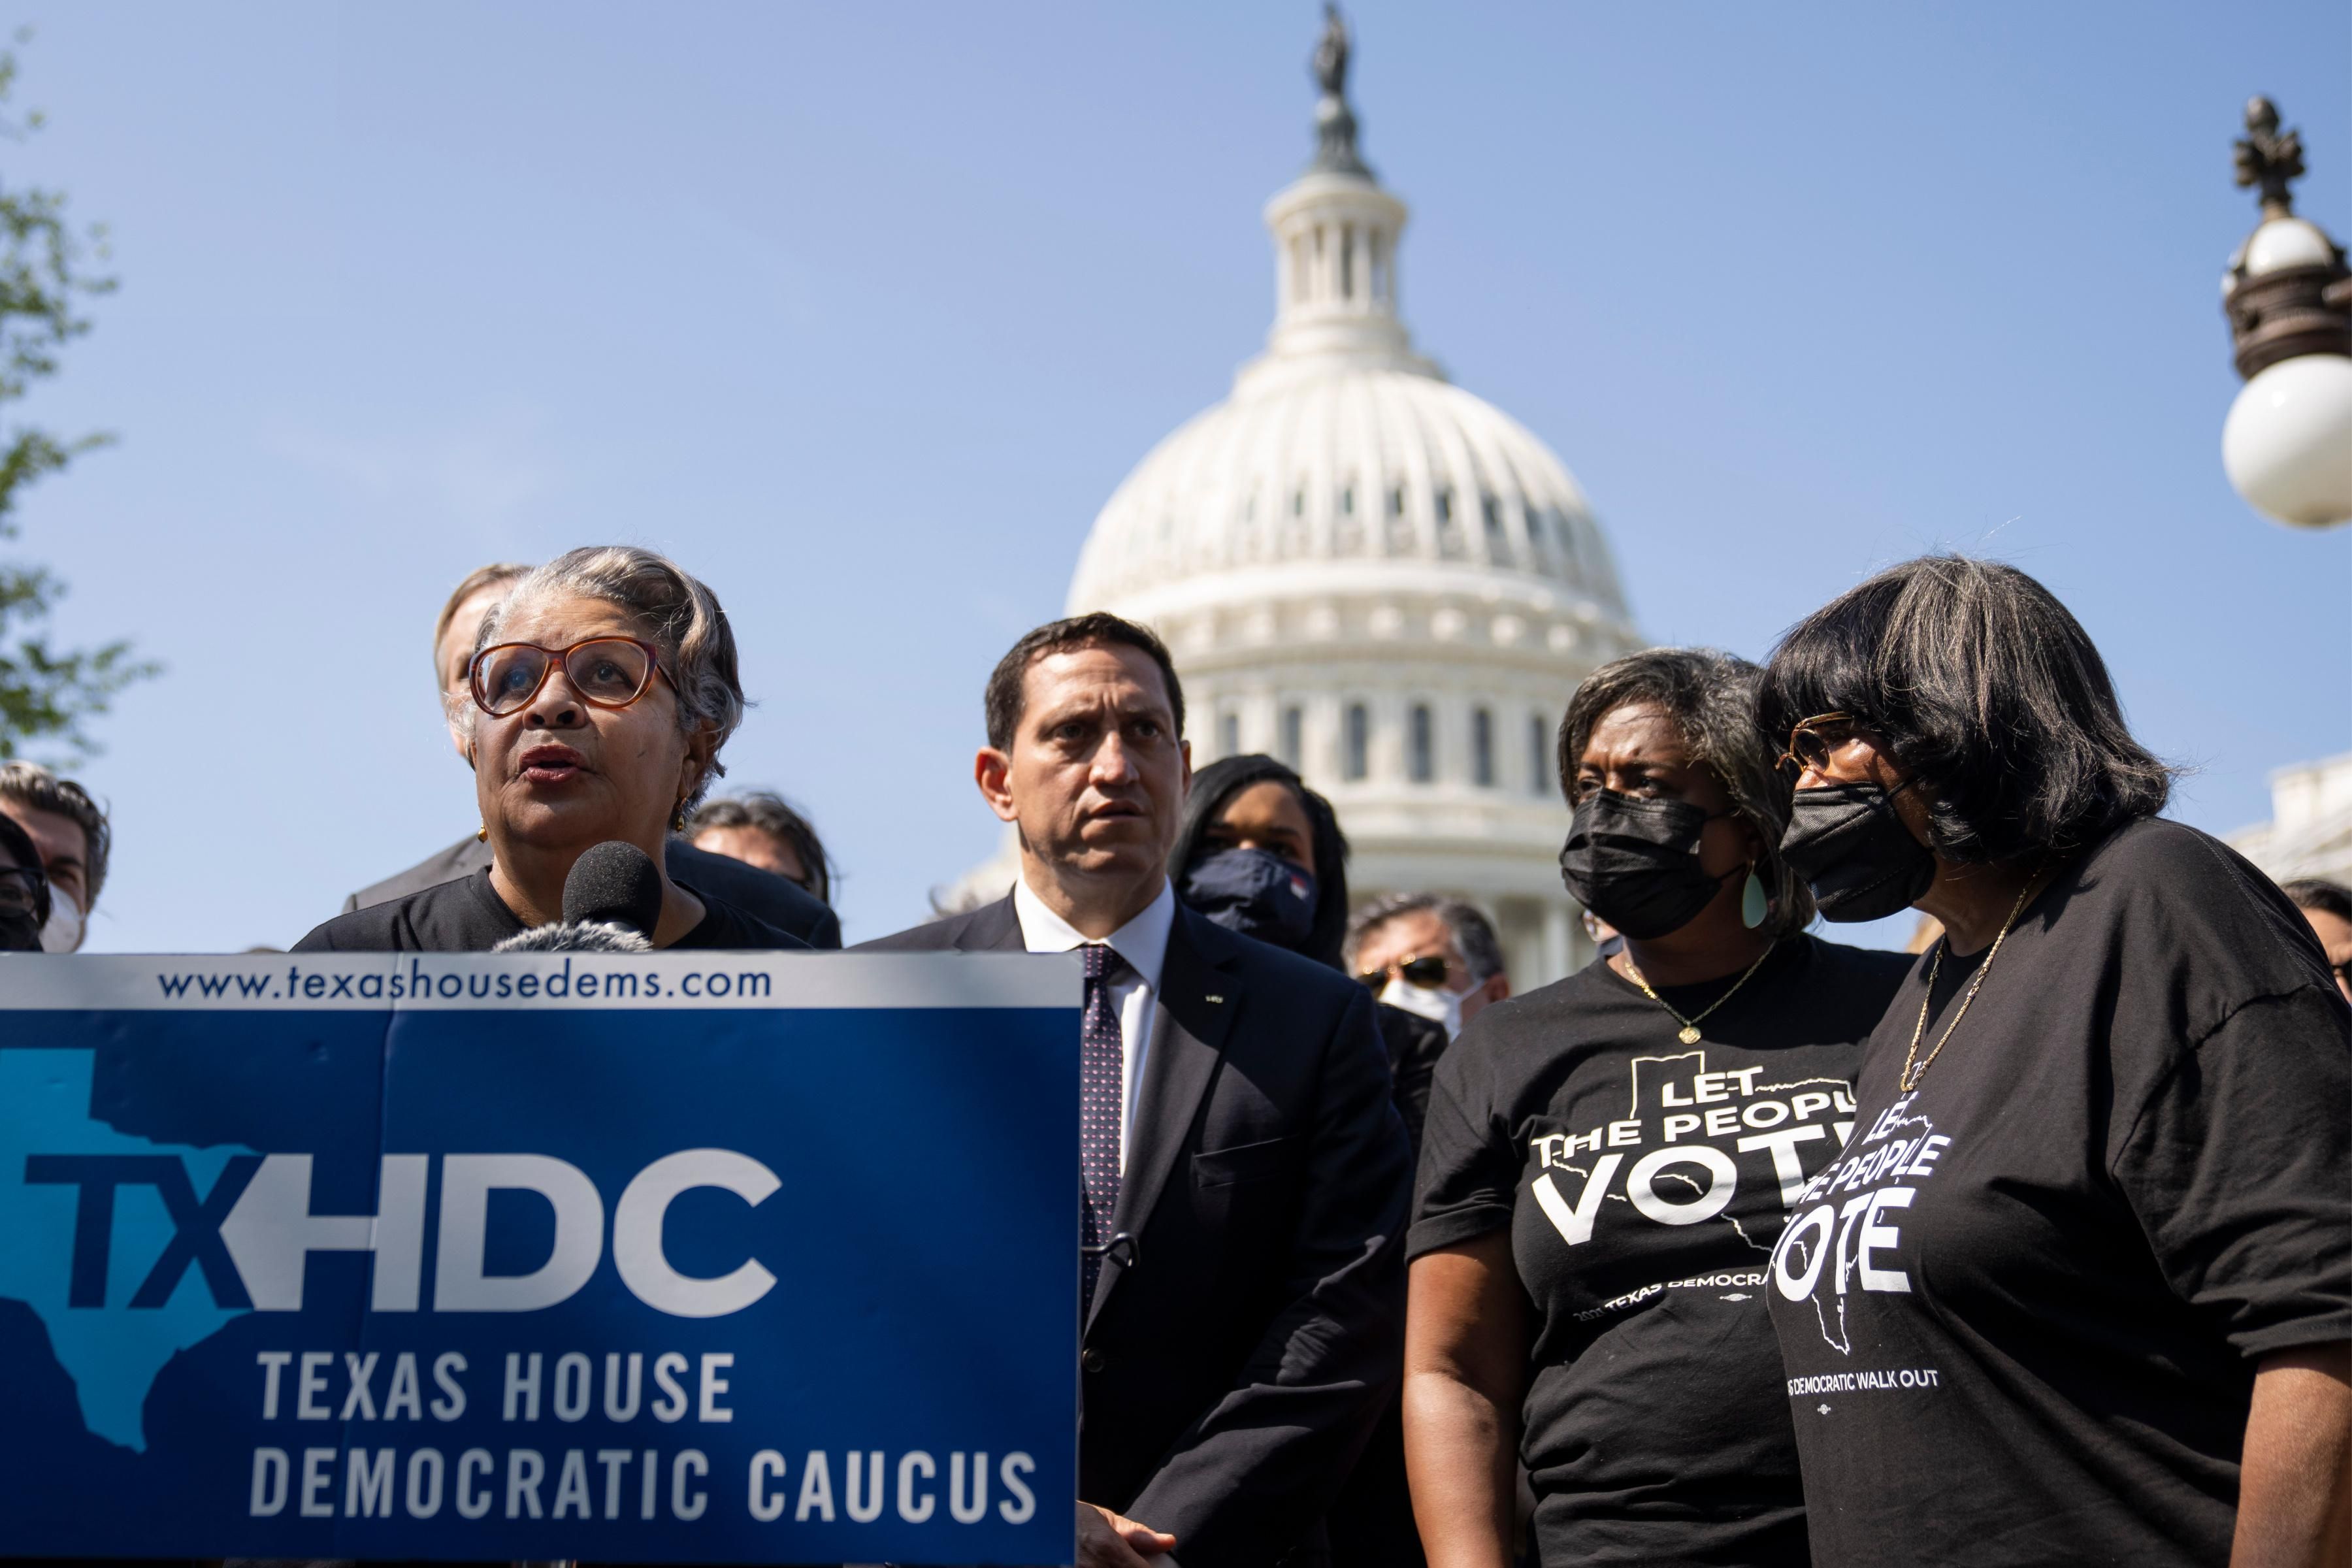 Texas Rep. Senfronia Thompson (D-141), joined by fellow Democratic state representatives, speaks during a news conference about voting rights outside the U.S. Capitol in Washington, D.C. on August 6, 2021. (Photo: Drew Angerer via Getty Images)